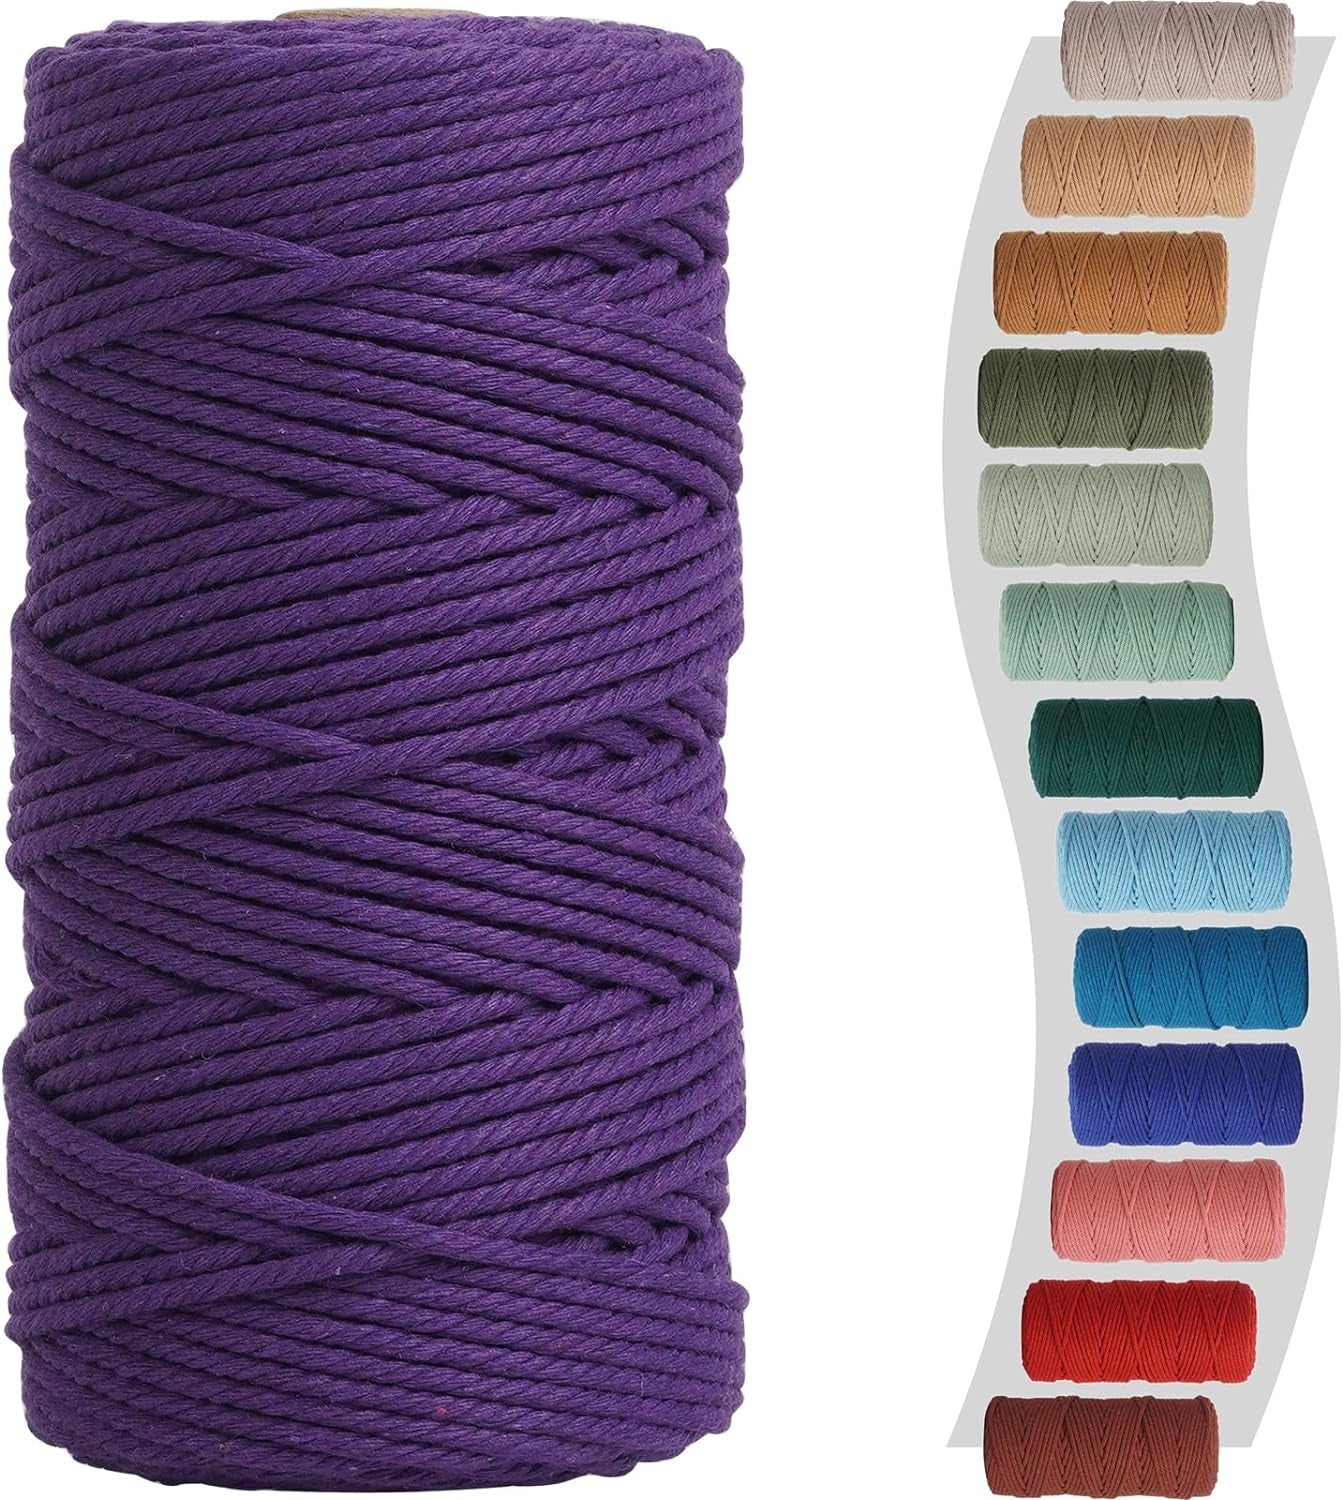 Macrame Cord 3Mm 220Yards (200 Meters) Mint Green Macrame Supplies Macrame Yarn, Colored Cotton Rope, Colored Cord for DIY